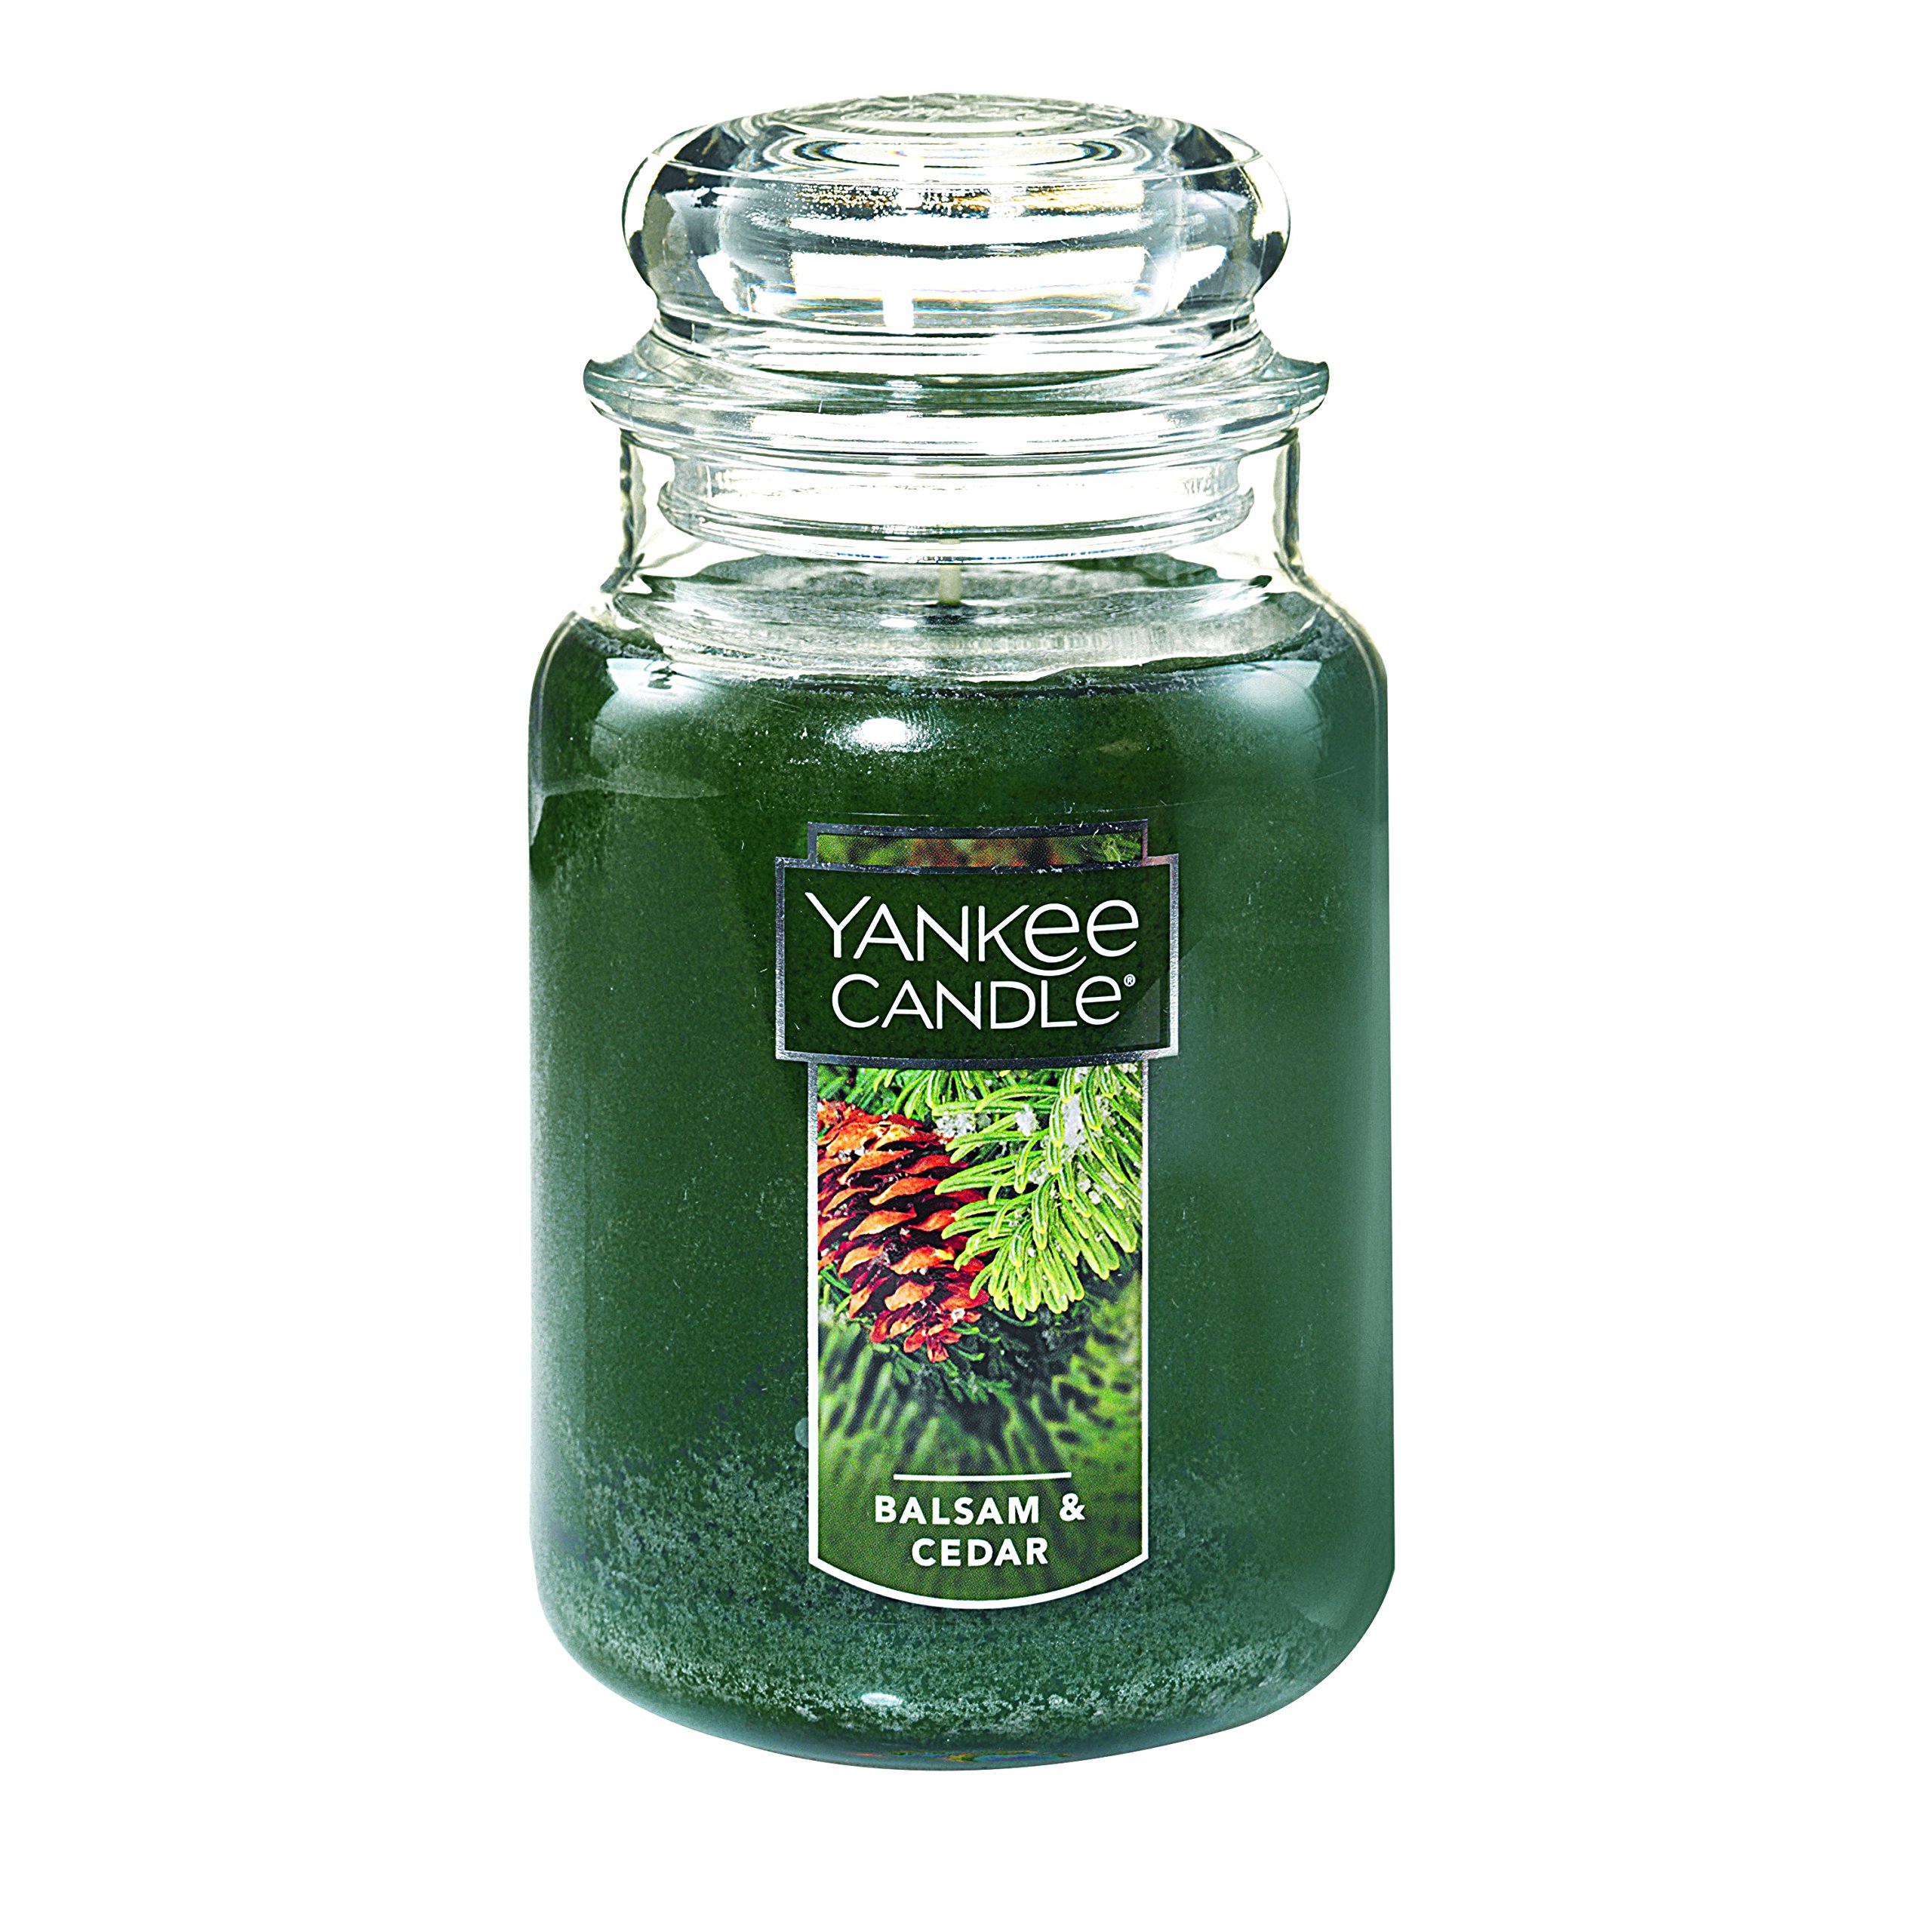 Yankee Candle Balsam & Cedar Scented, Classic 22oz Large Jar Single Wick Candle, Over 110 Hours of Burn Time | Holiday Gifts for All $14.73